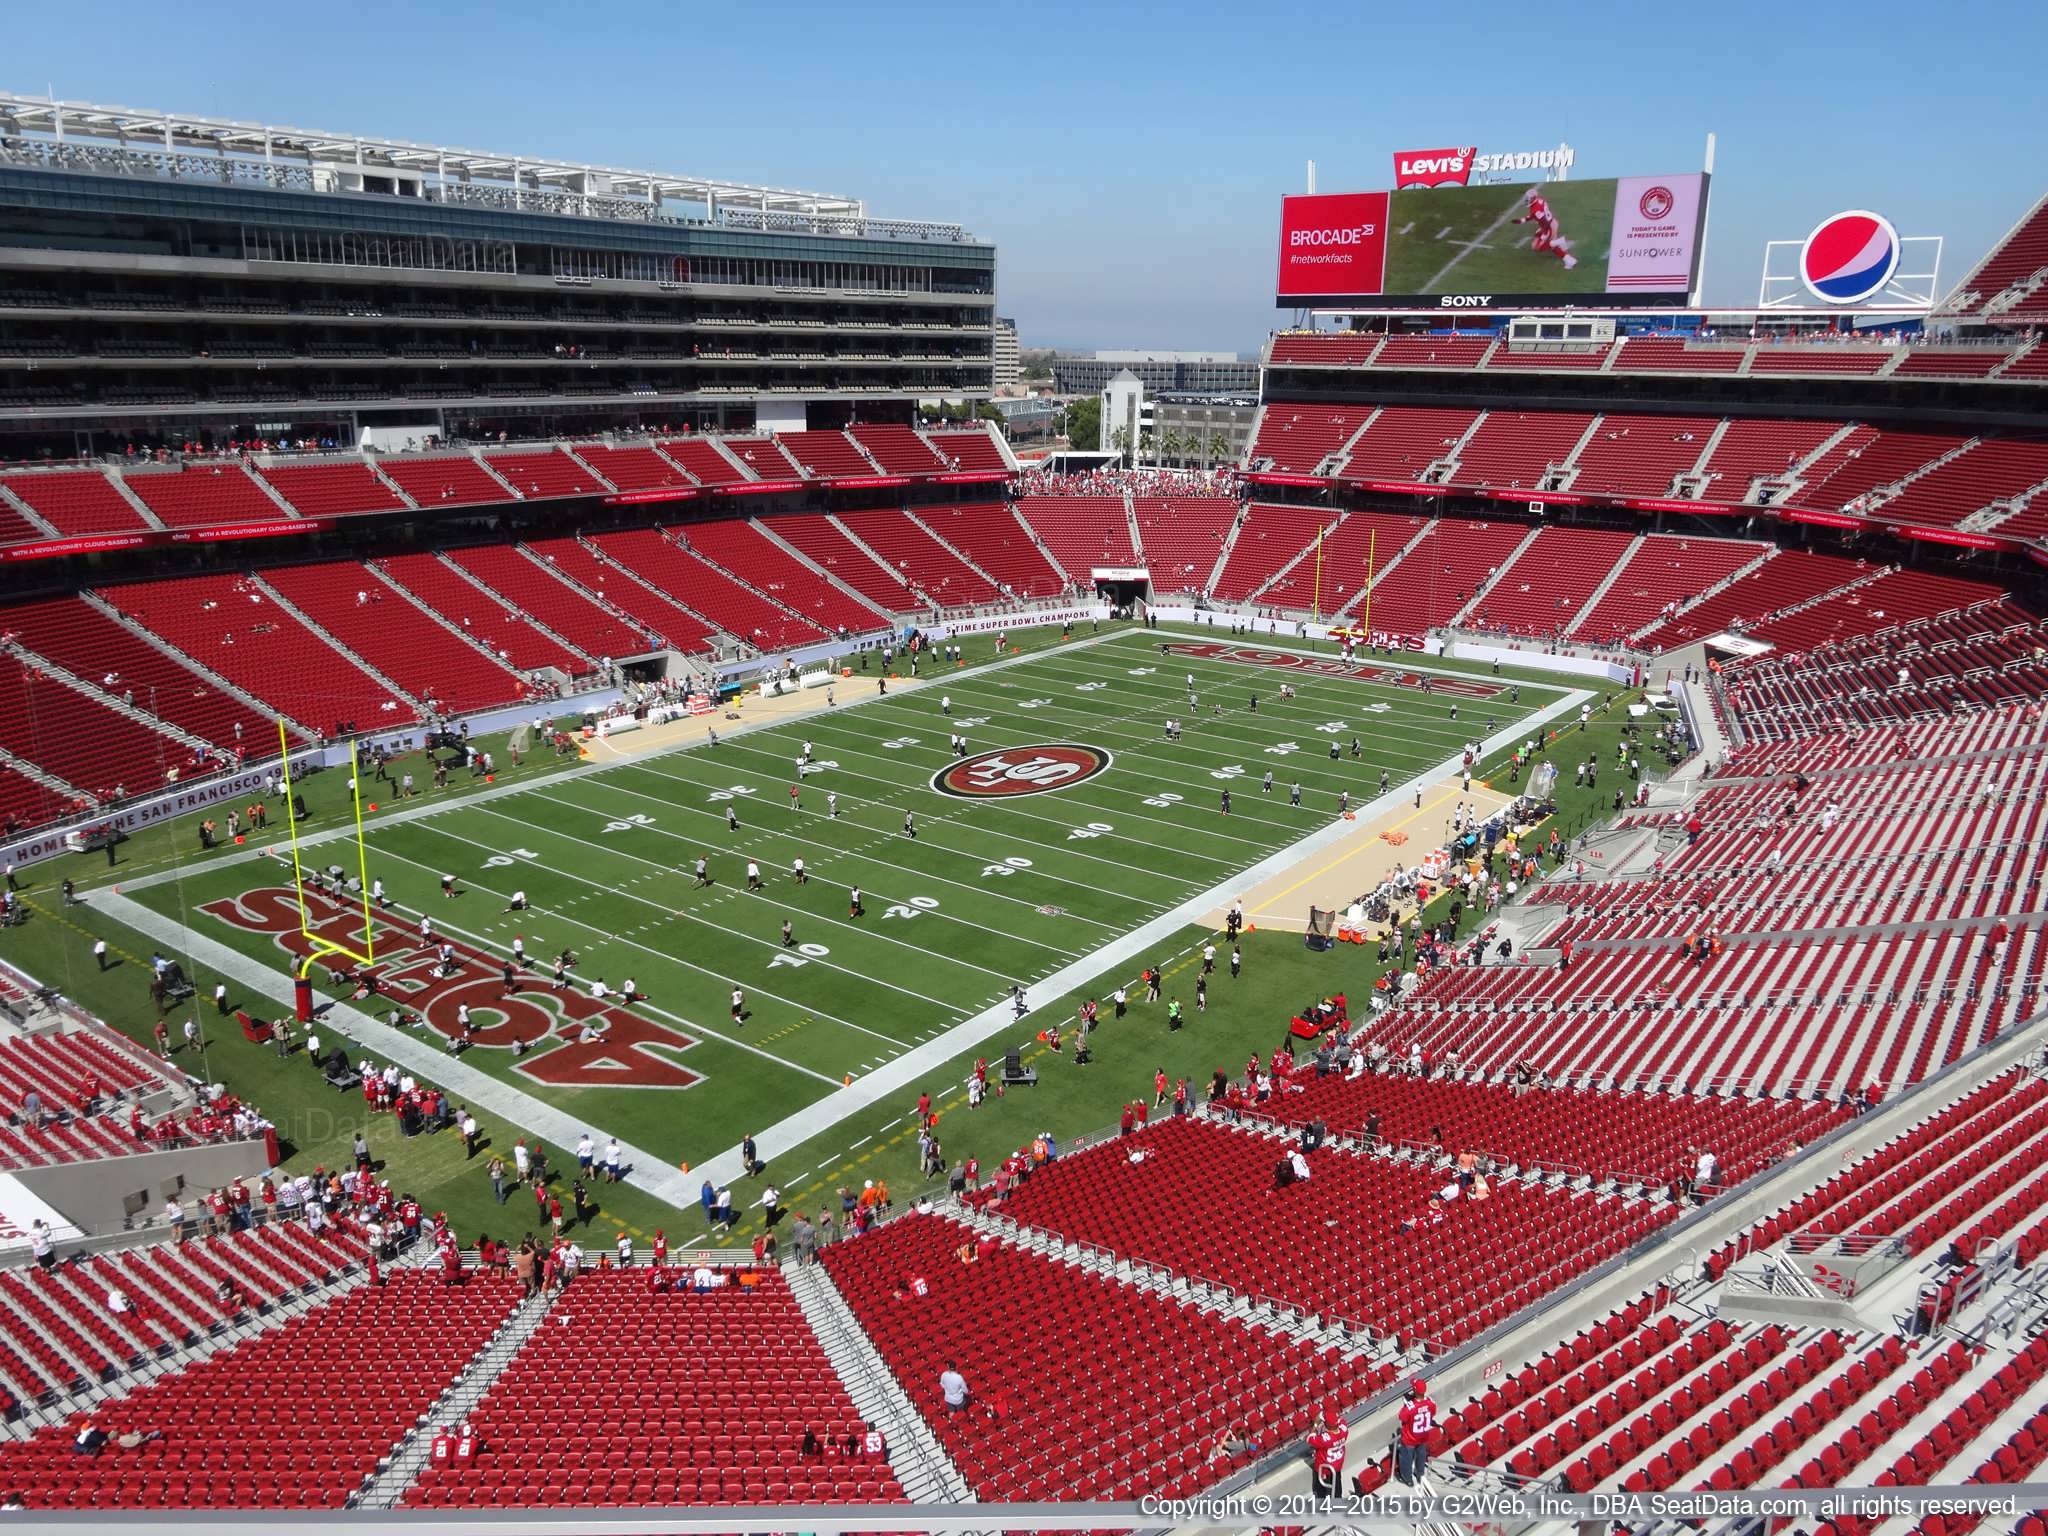 Seat view from section 321 at Levi’s Stadium, home of the San Francisco 49ers